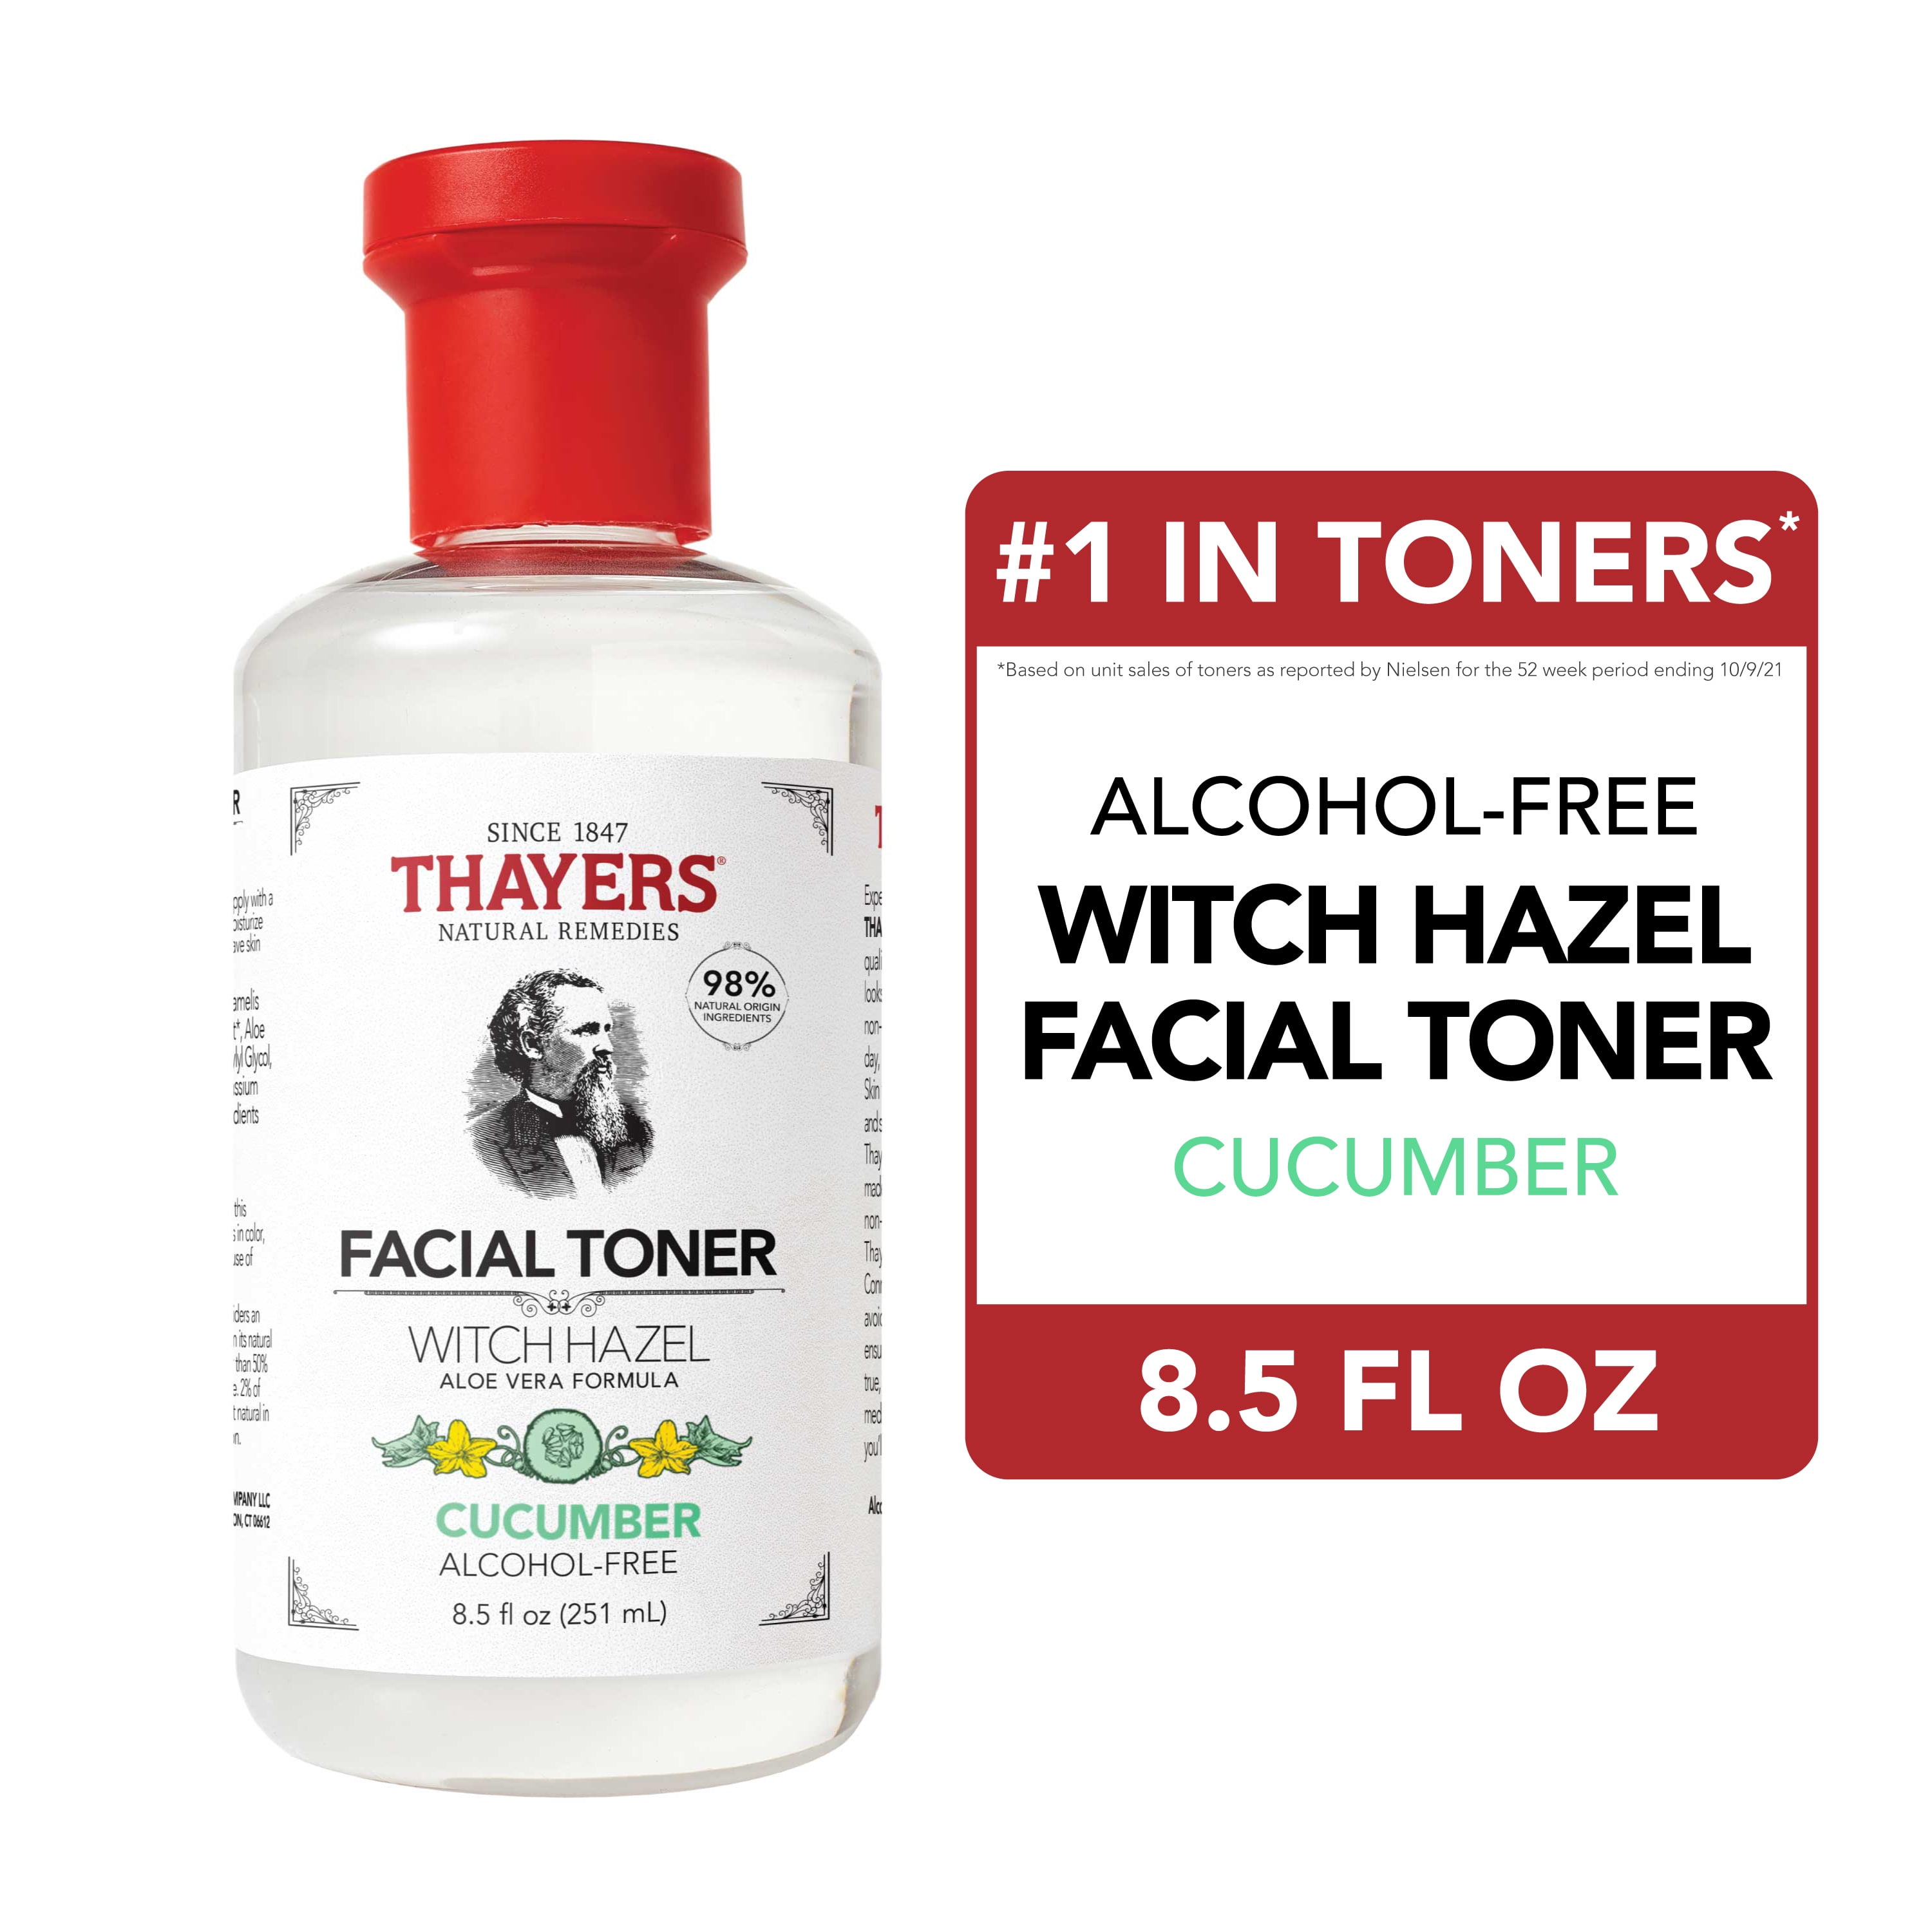 homemade facial toner with witch hazel Adult Pictures